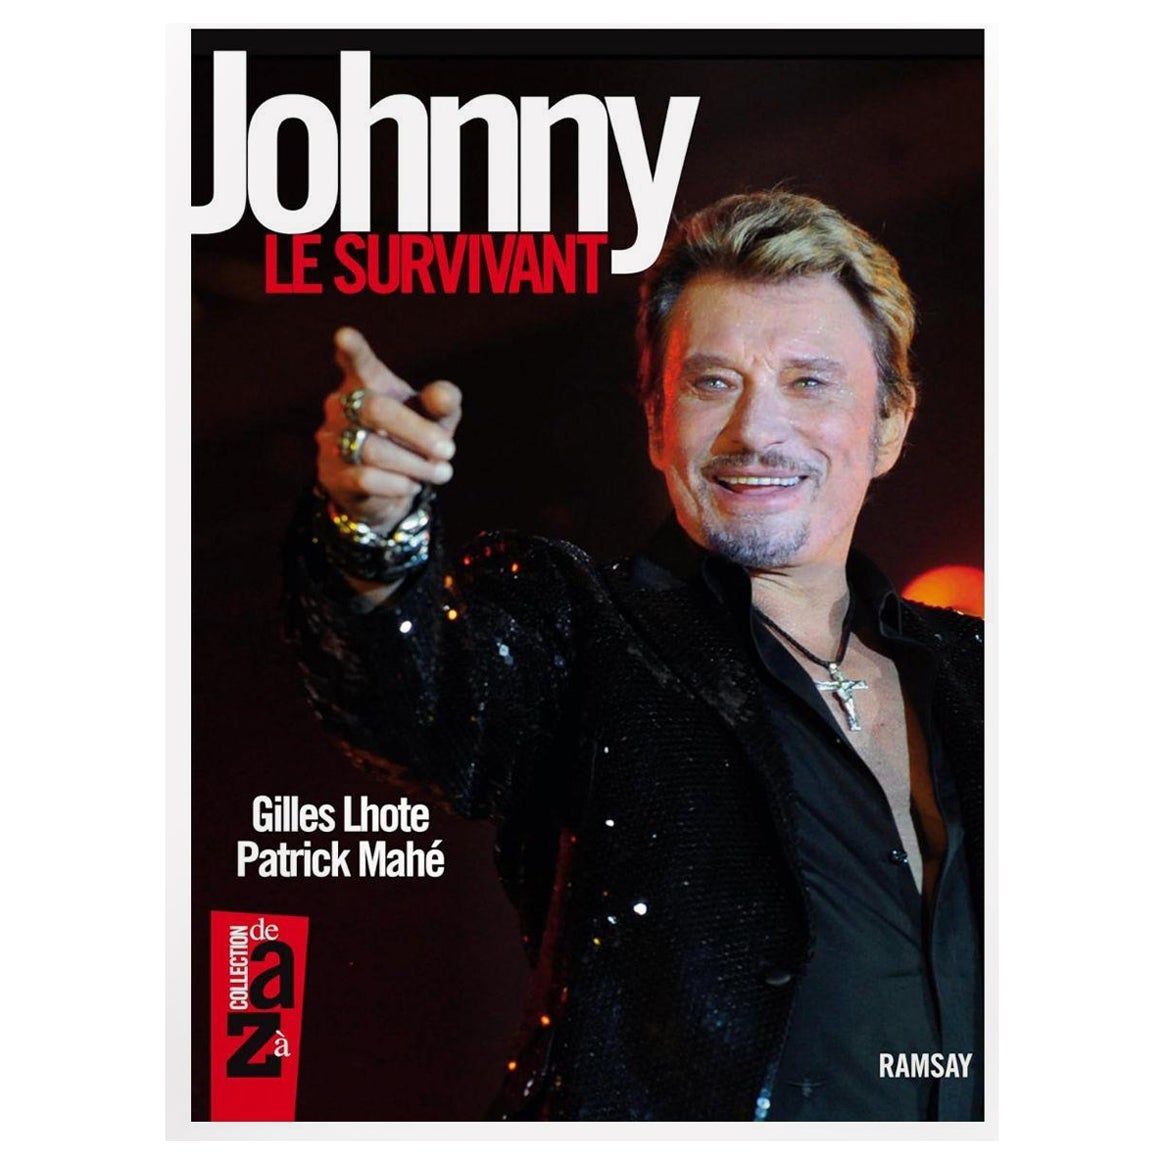 Johnny Halliday Le Survivant French Edition Paperback 1st Edition